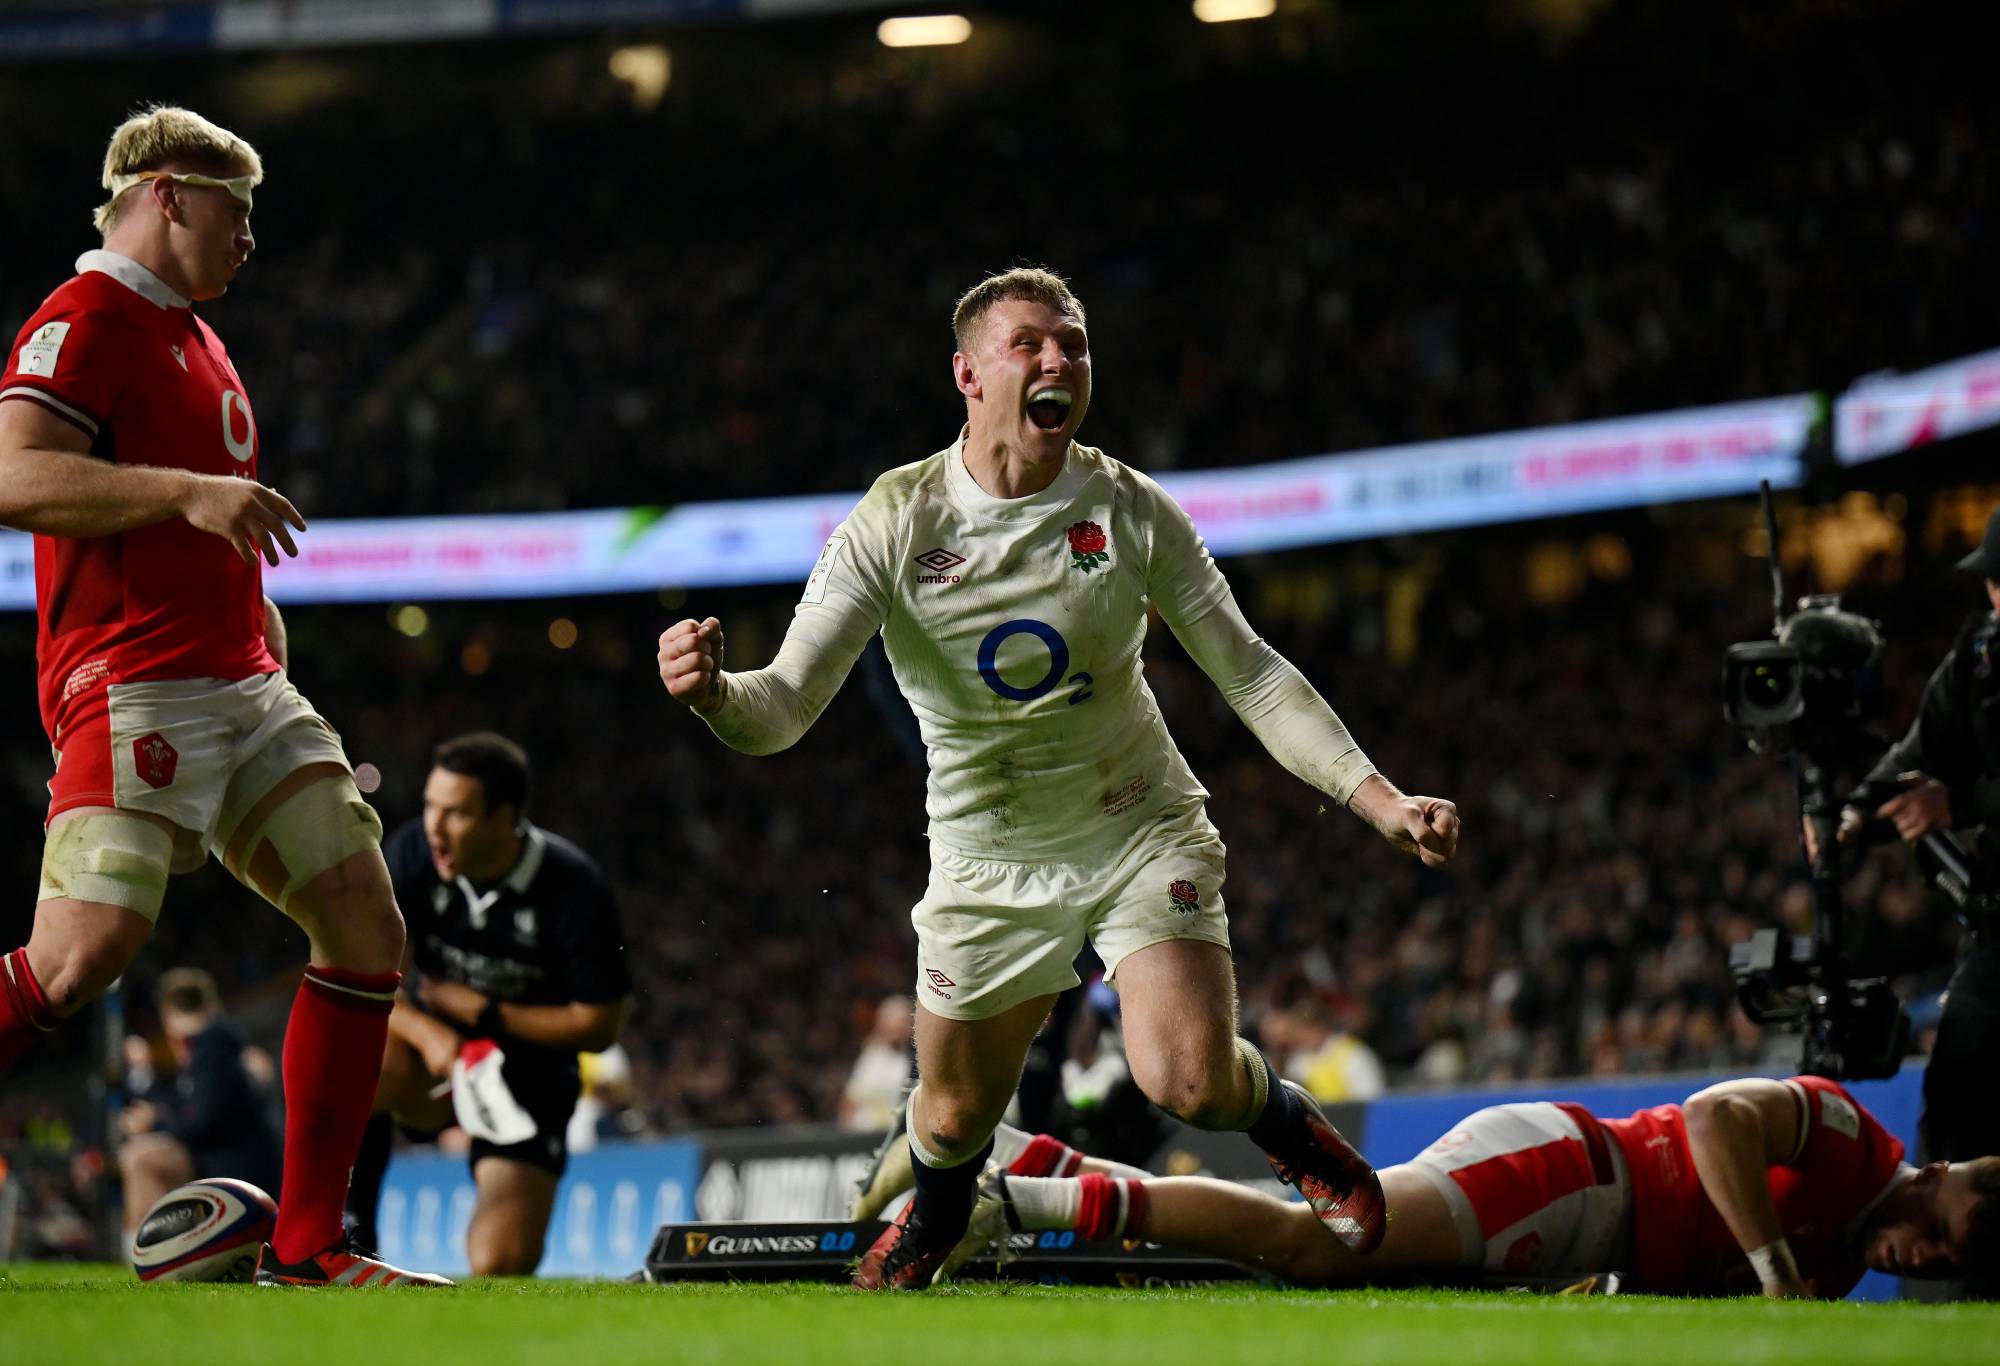 LONDON, ENGLAND - FEBRUARY 10: Fraser Dingwall of England celebrates scoring his team's second try during the Guinness Six Nations 2024 match between England and Wales at Twickenham Stadium on February 10, 2024 in London, England. (Photo by Dan Mullan - RFU/The RFU Collection via Getty Images)